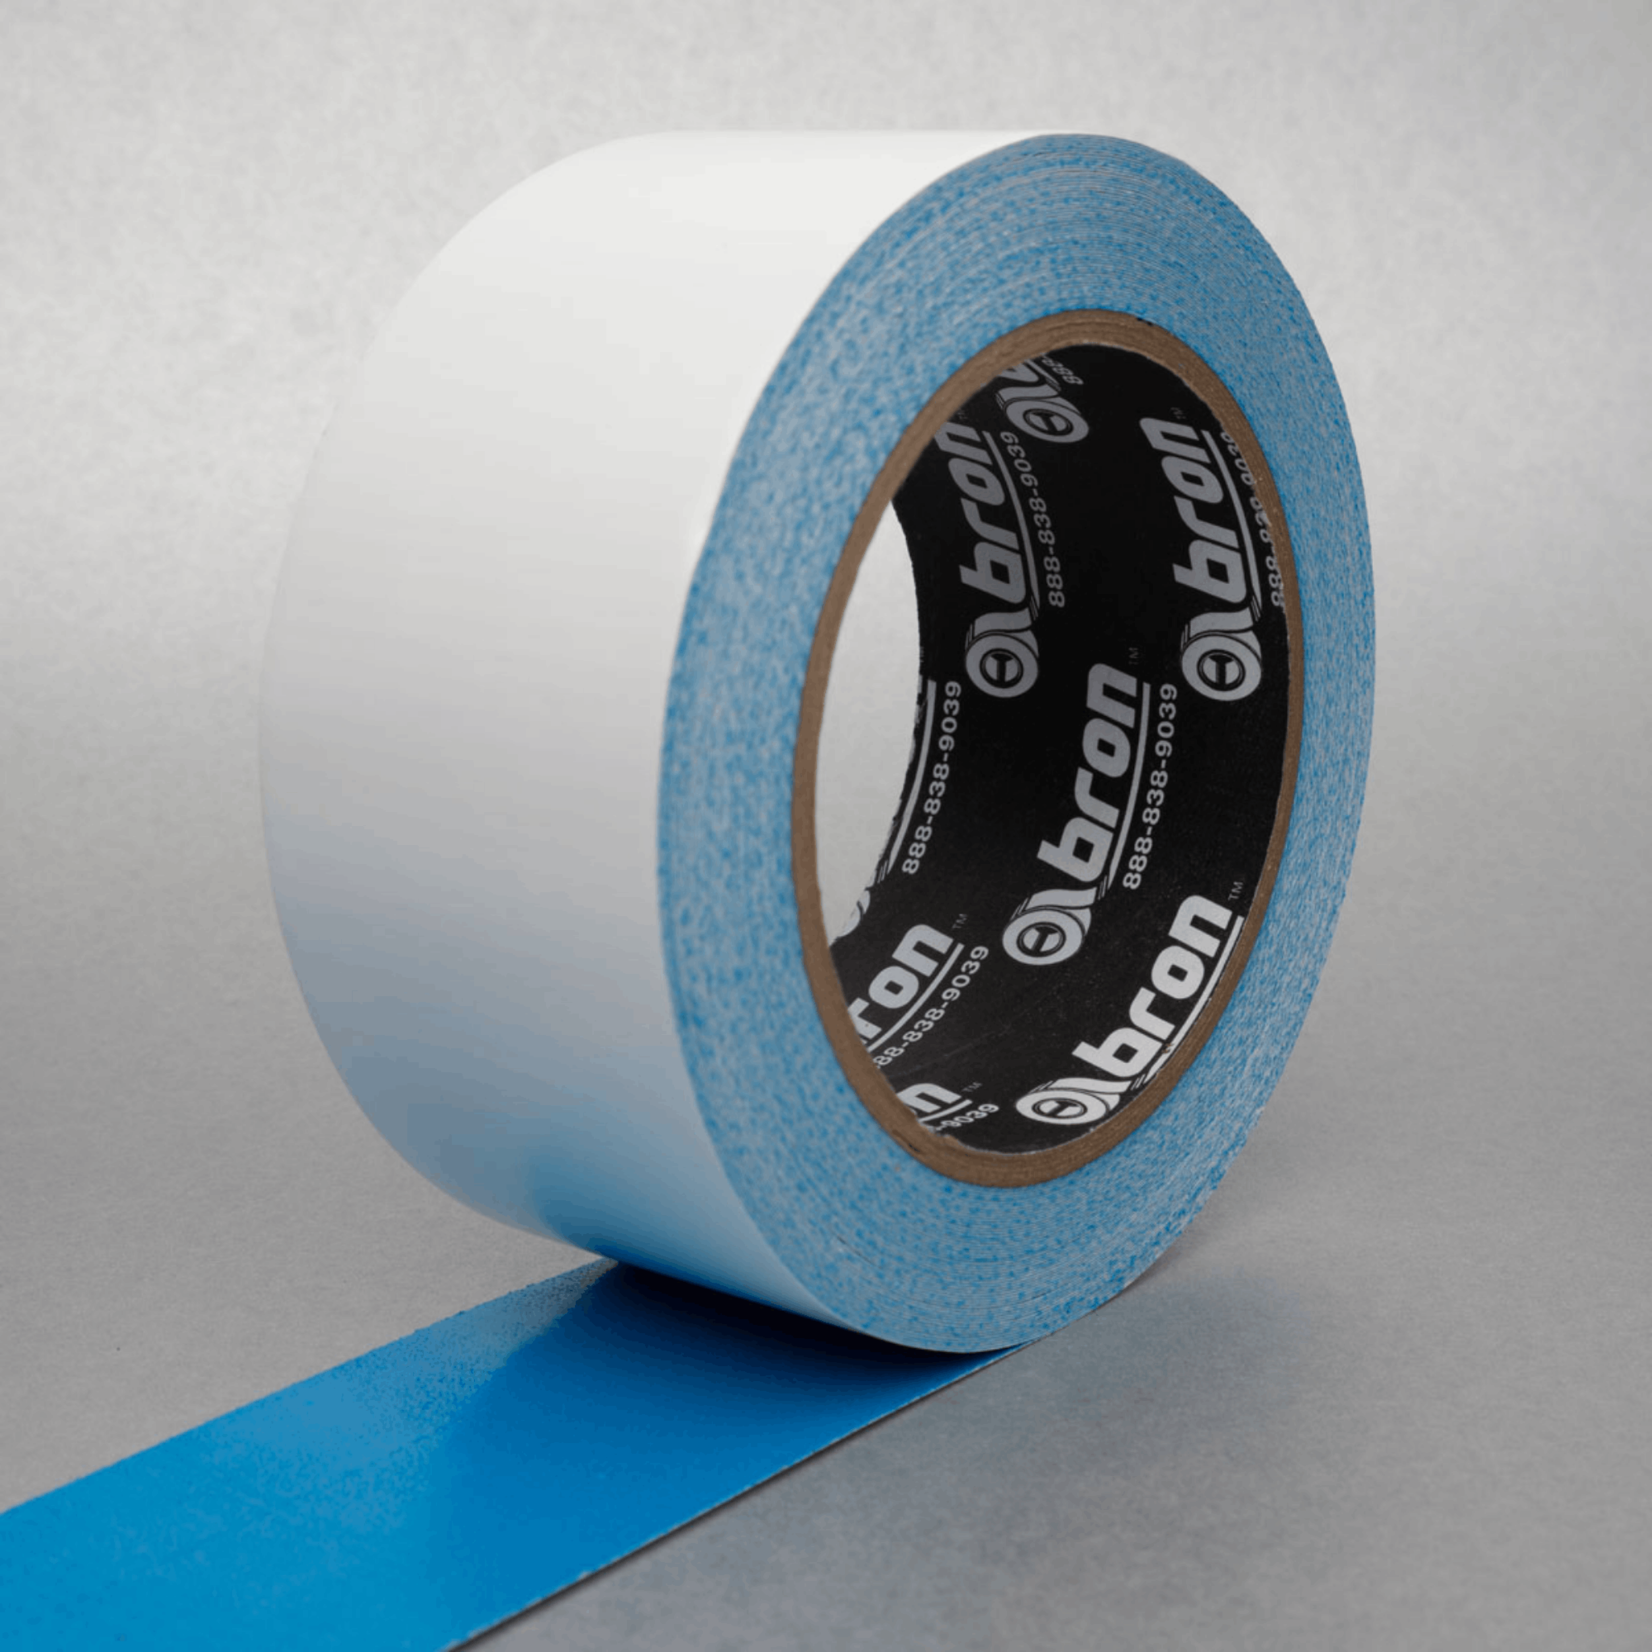 Shurtape Double Sided Tape (48MMx20M)